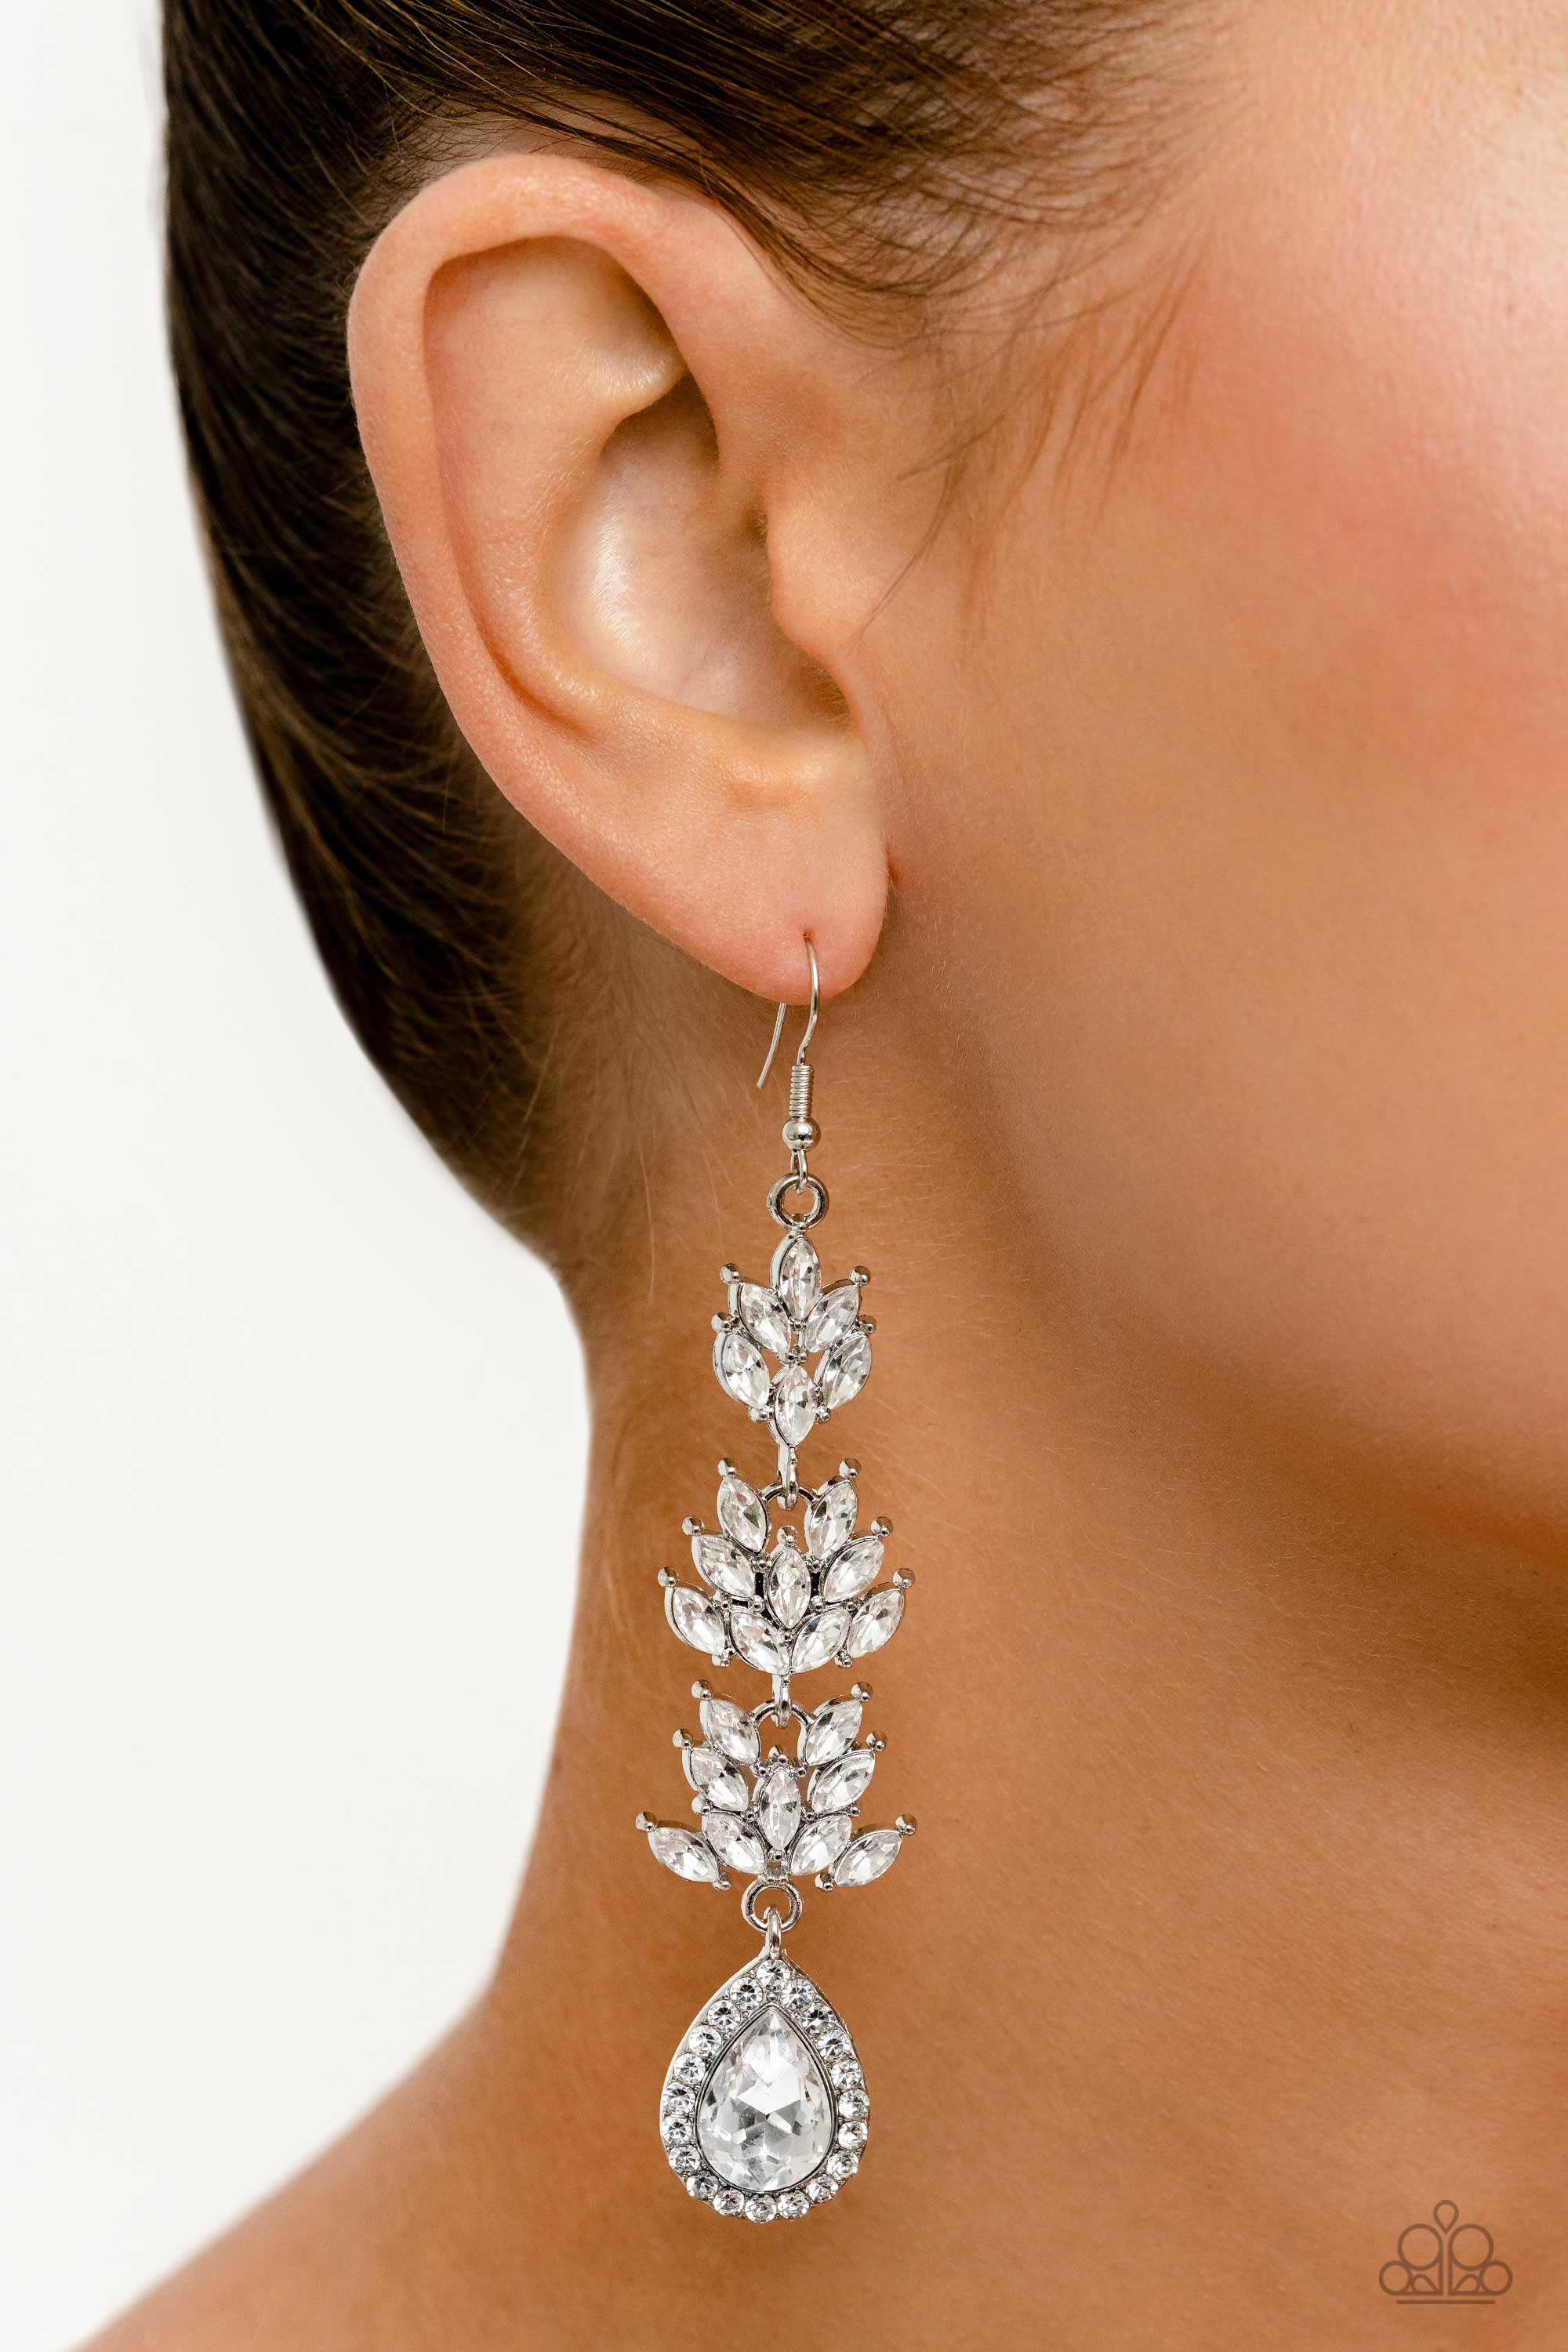 Water Lily Whimsy White Earrings - Paparazzi Accessories- lightbox - CarasShop.com - $5 Jewelry by Cara Jewels